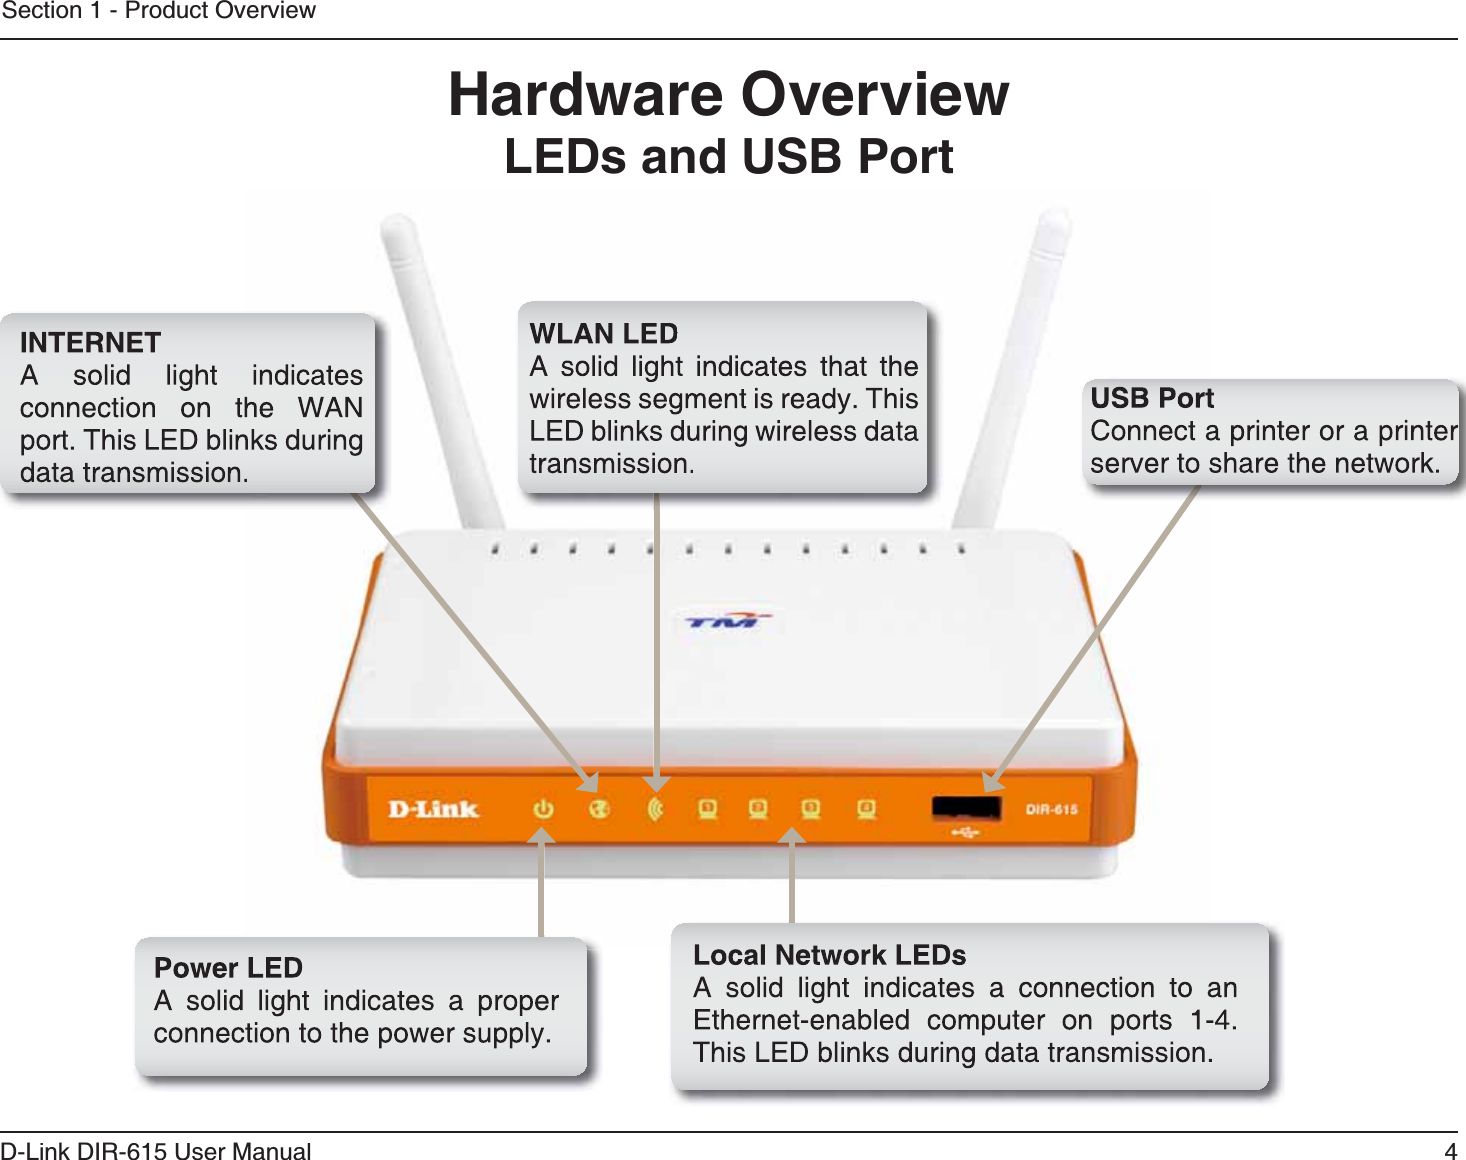 4D-Link DIR-615 User ManualSection 1 - Product Overview*CTFYCTG1XGTXKGY.&apos;&amp;UCPF75$2QTV